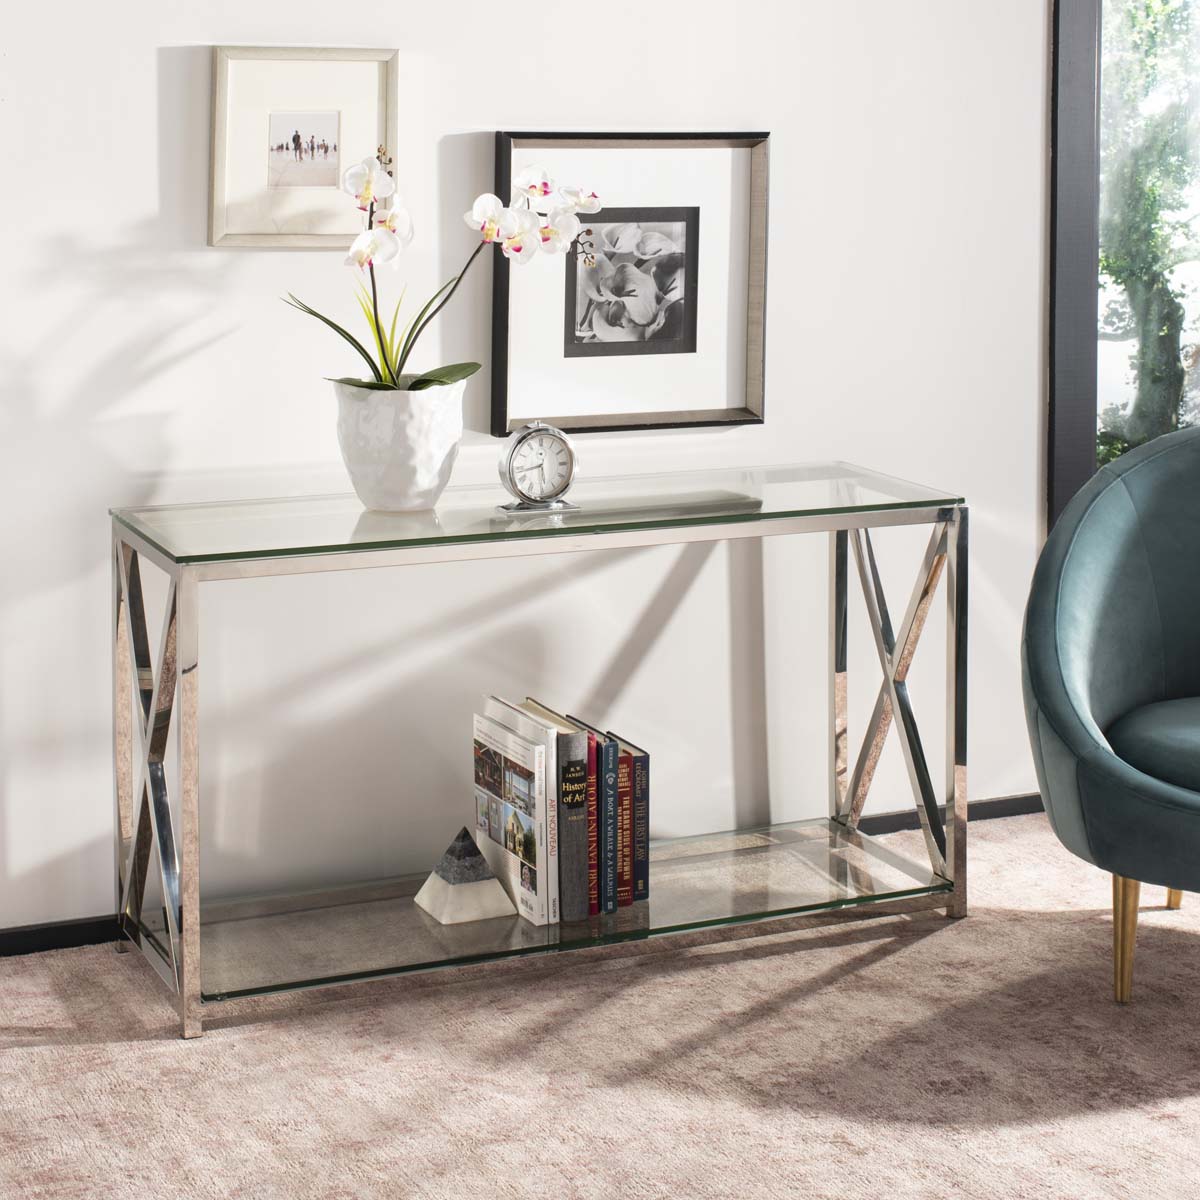 Safavieh Couture Hayward Chrome Console With Glass Top - Chrome